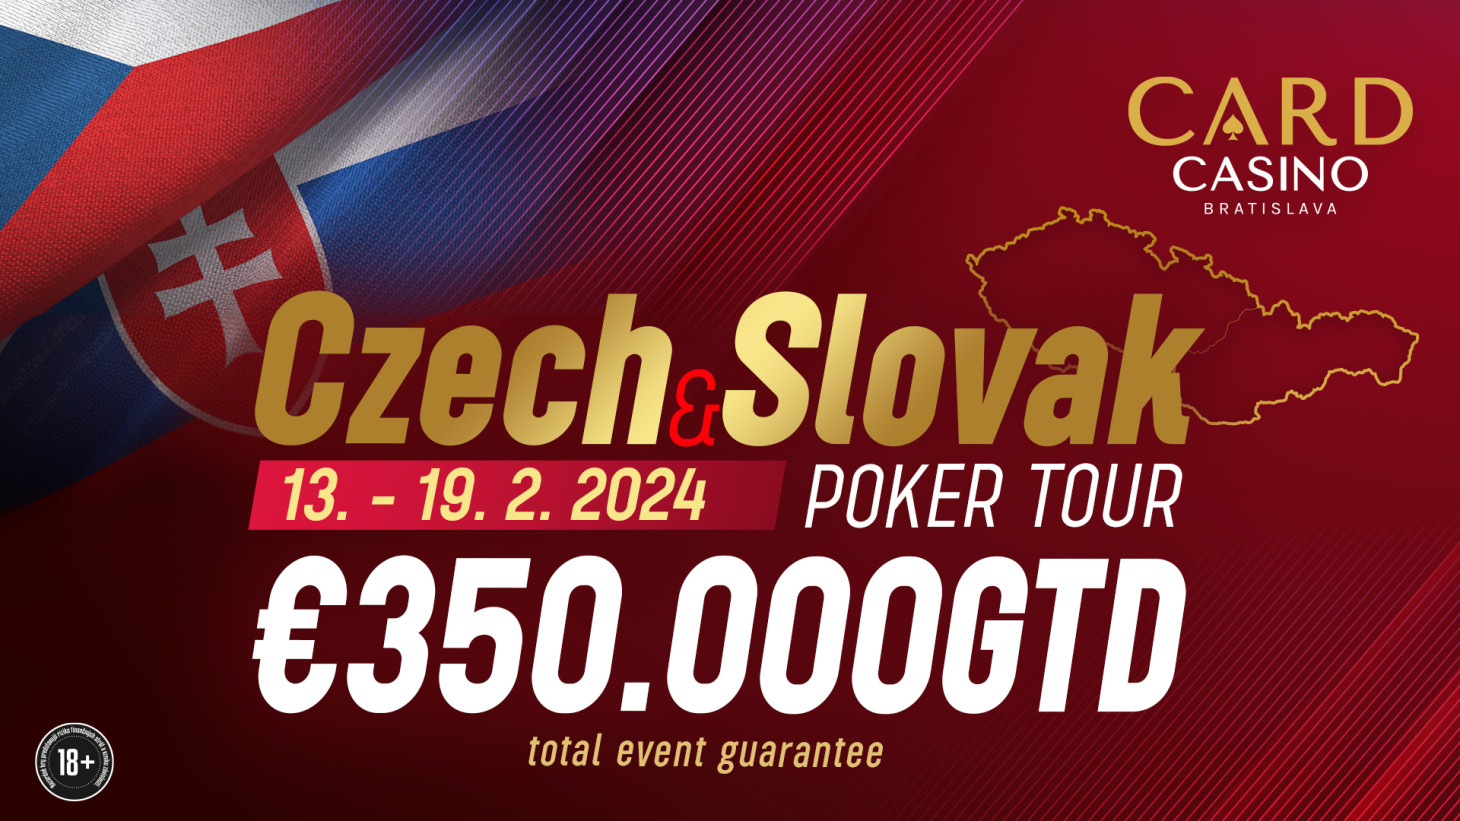 Card Casino Welcomes Czech&Slovak Poker Tour with €350,000 GTD